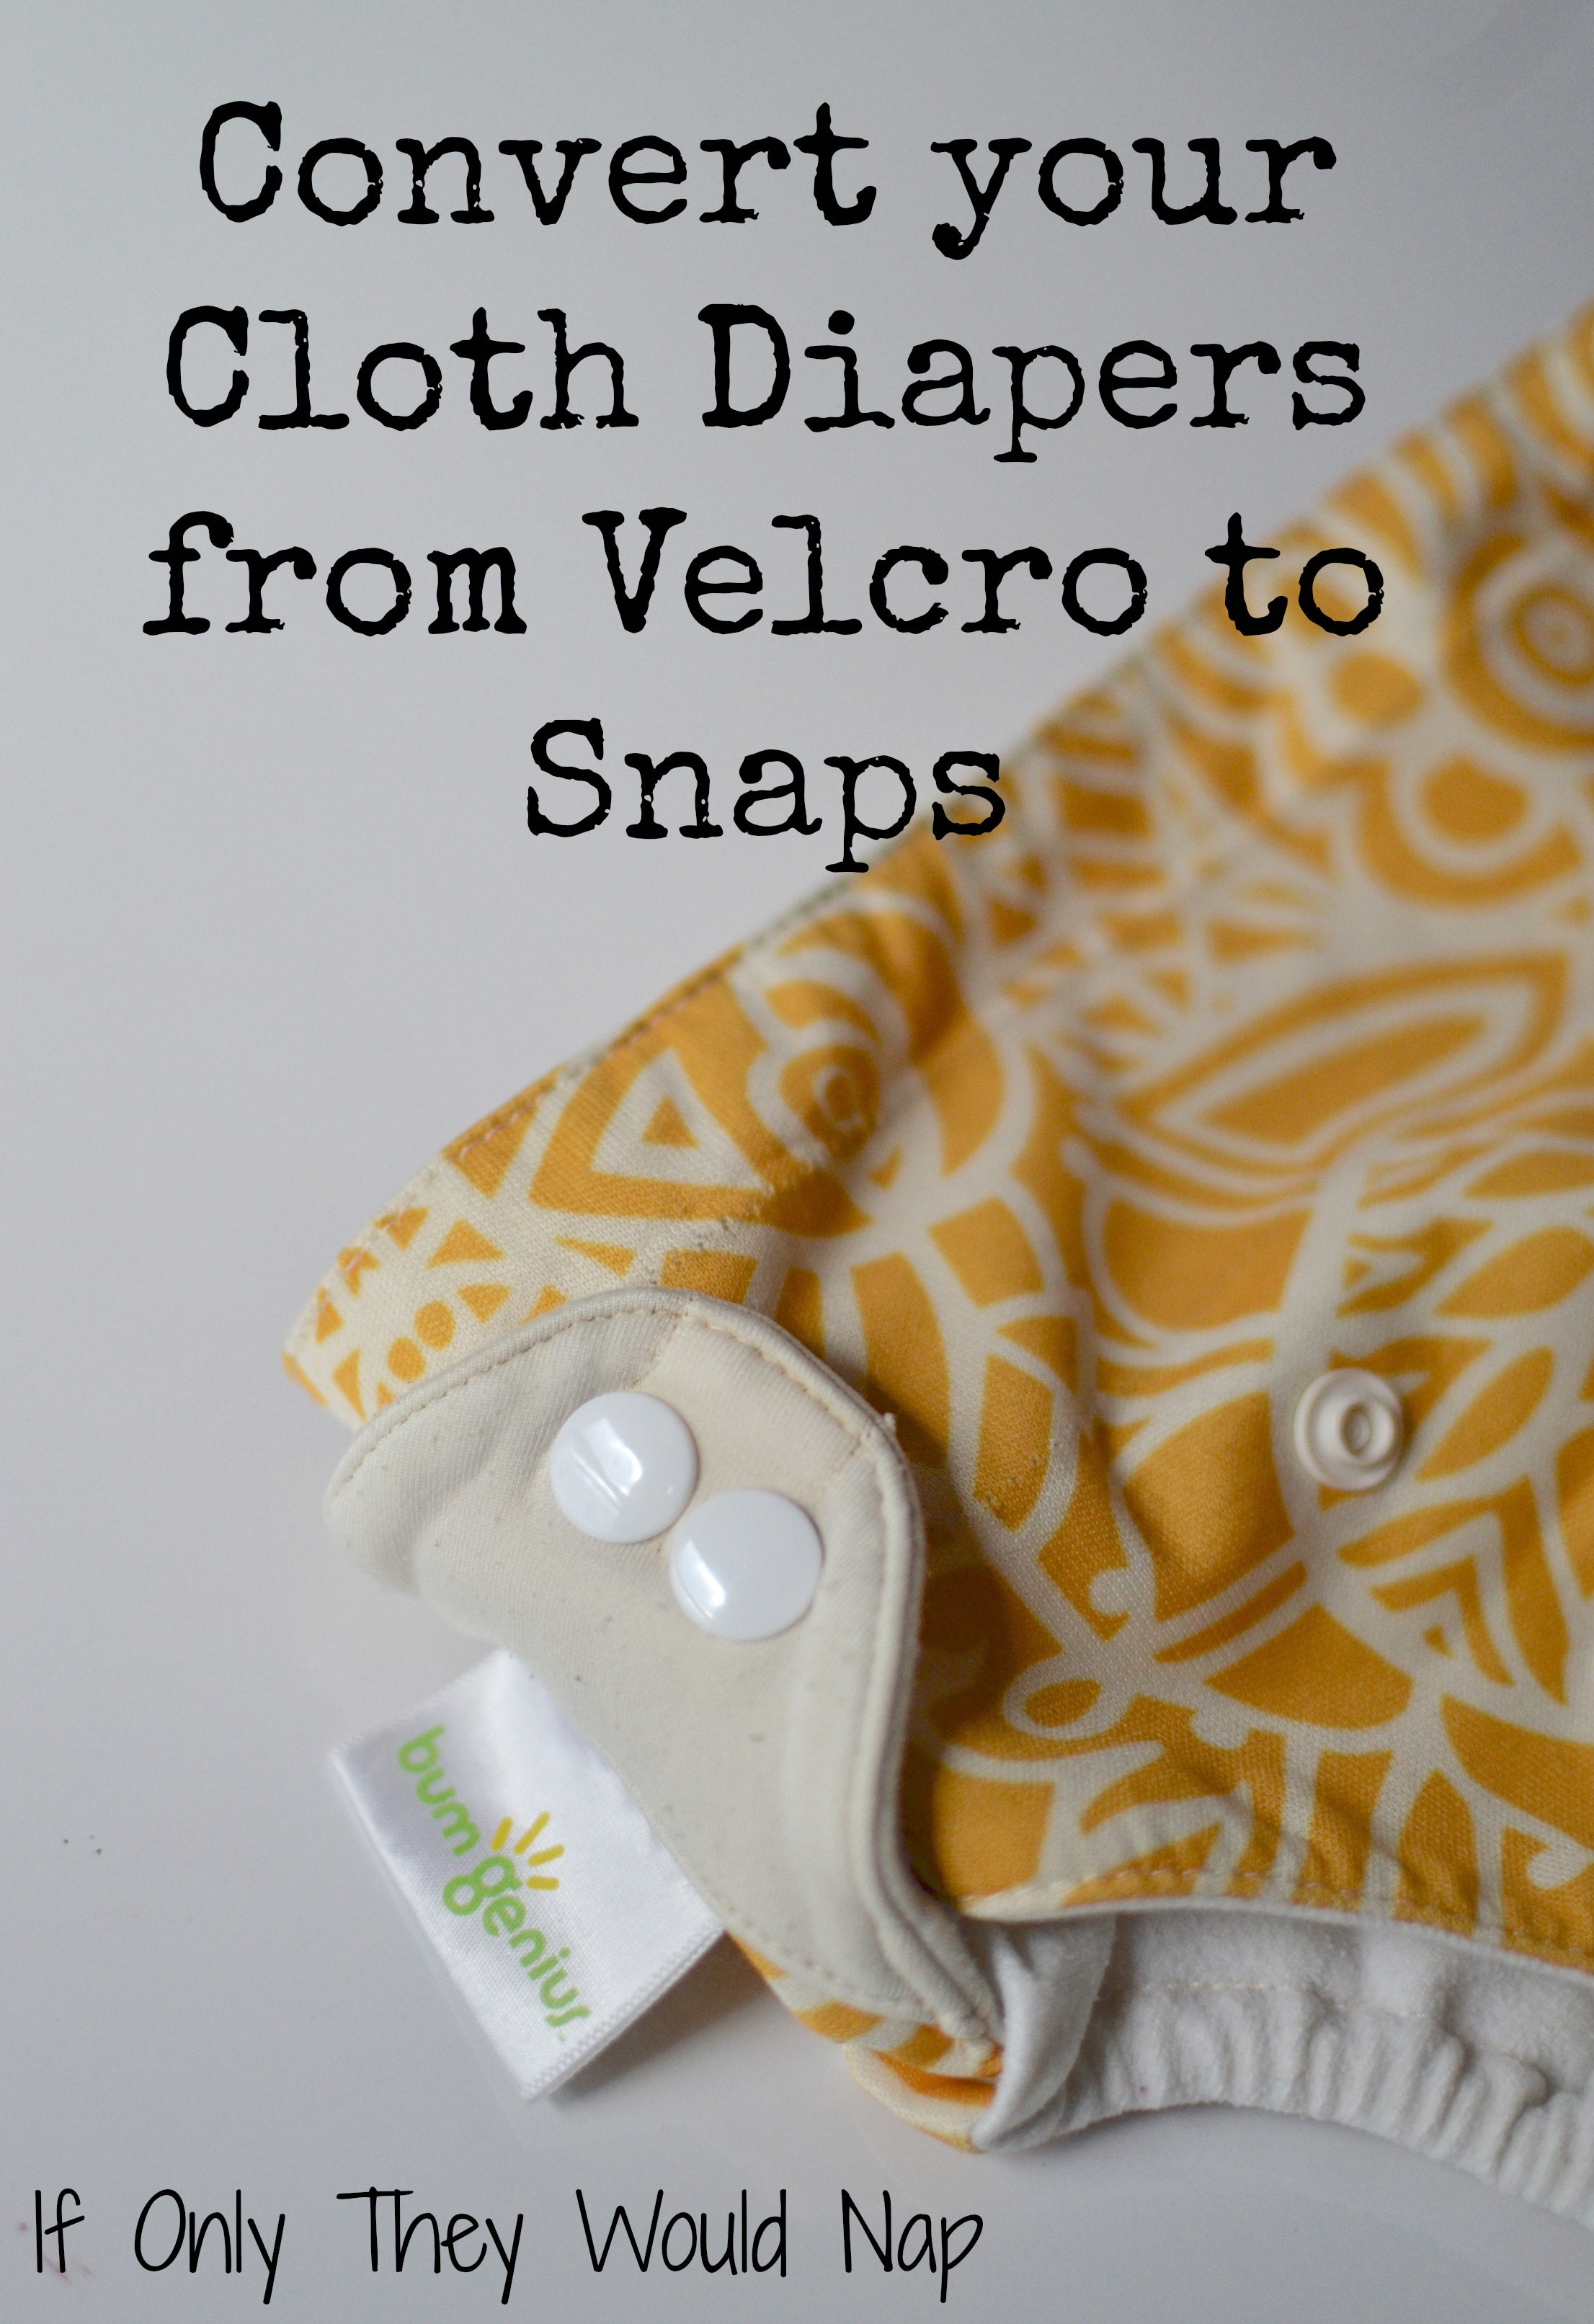 Convert your cloth diapers from velcro to snaps [a tutorial]